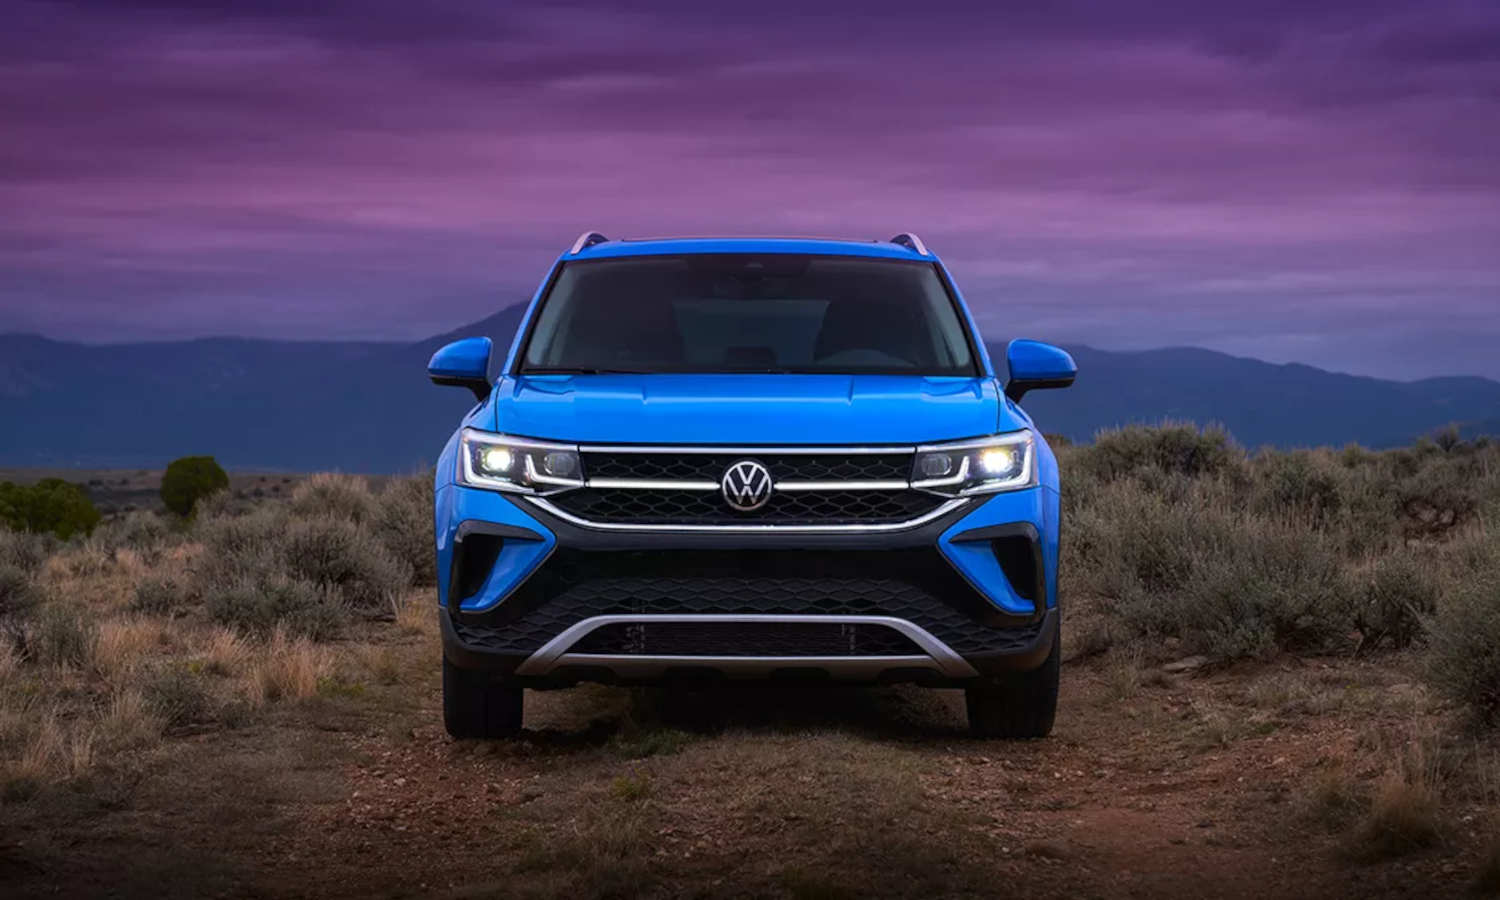 The 2023 Volkswagen Taos SUV at sunset